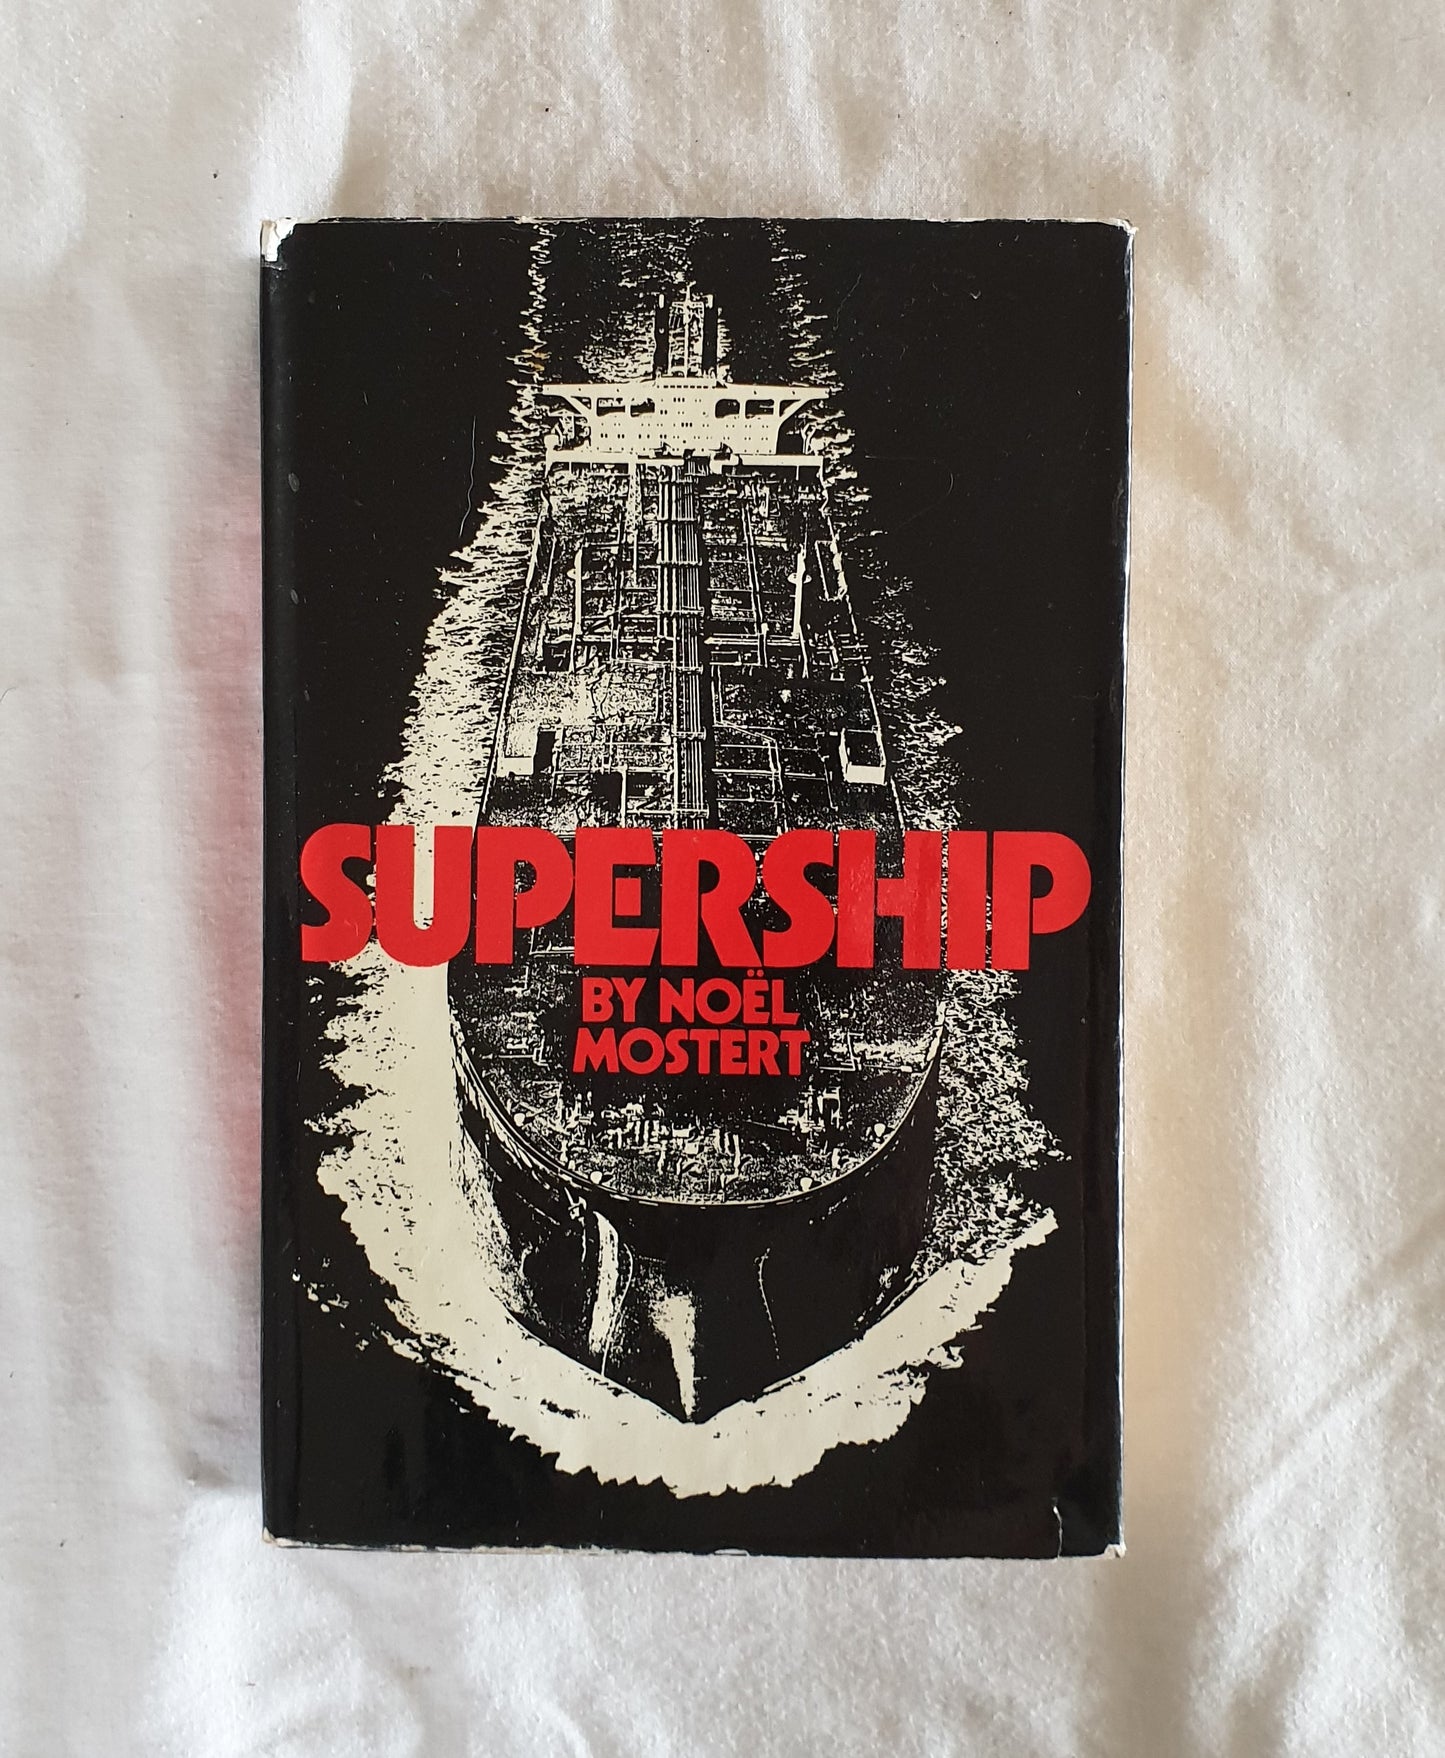 Supership  by Noel Mostert